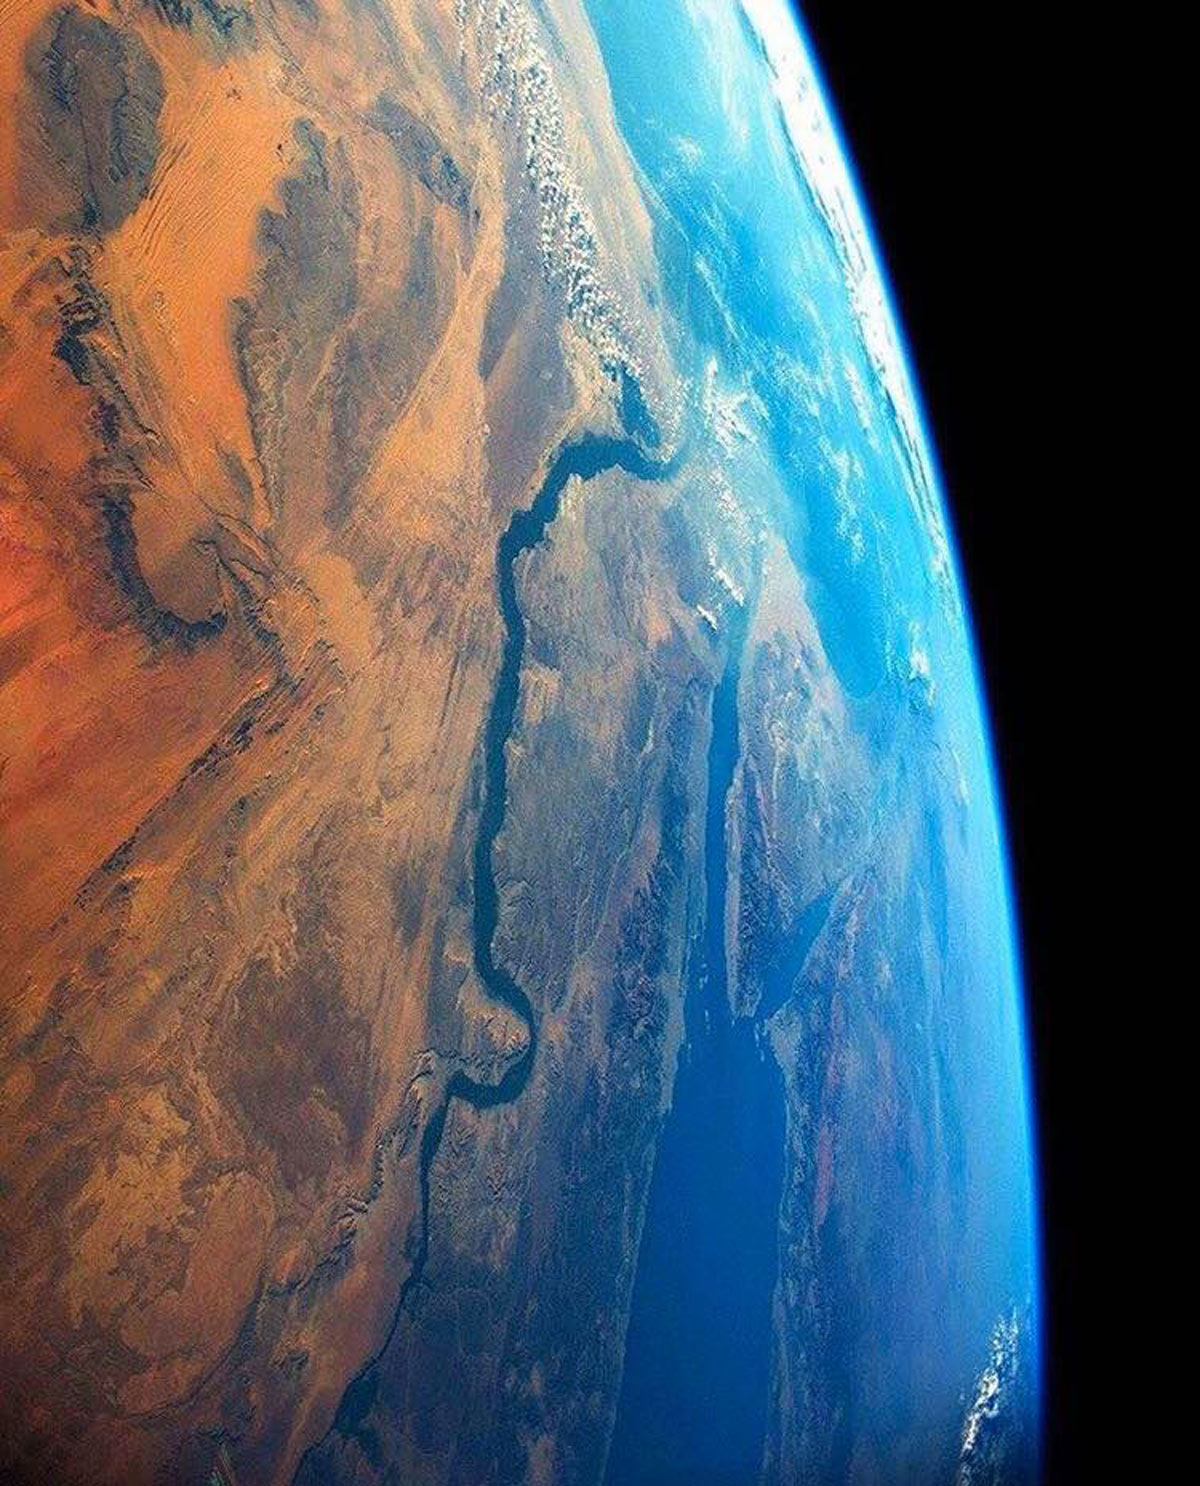 The Nile river and delta from the ISS...